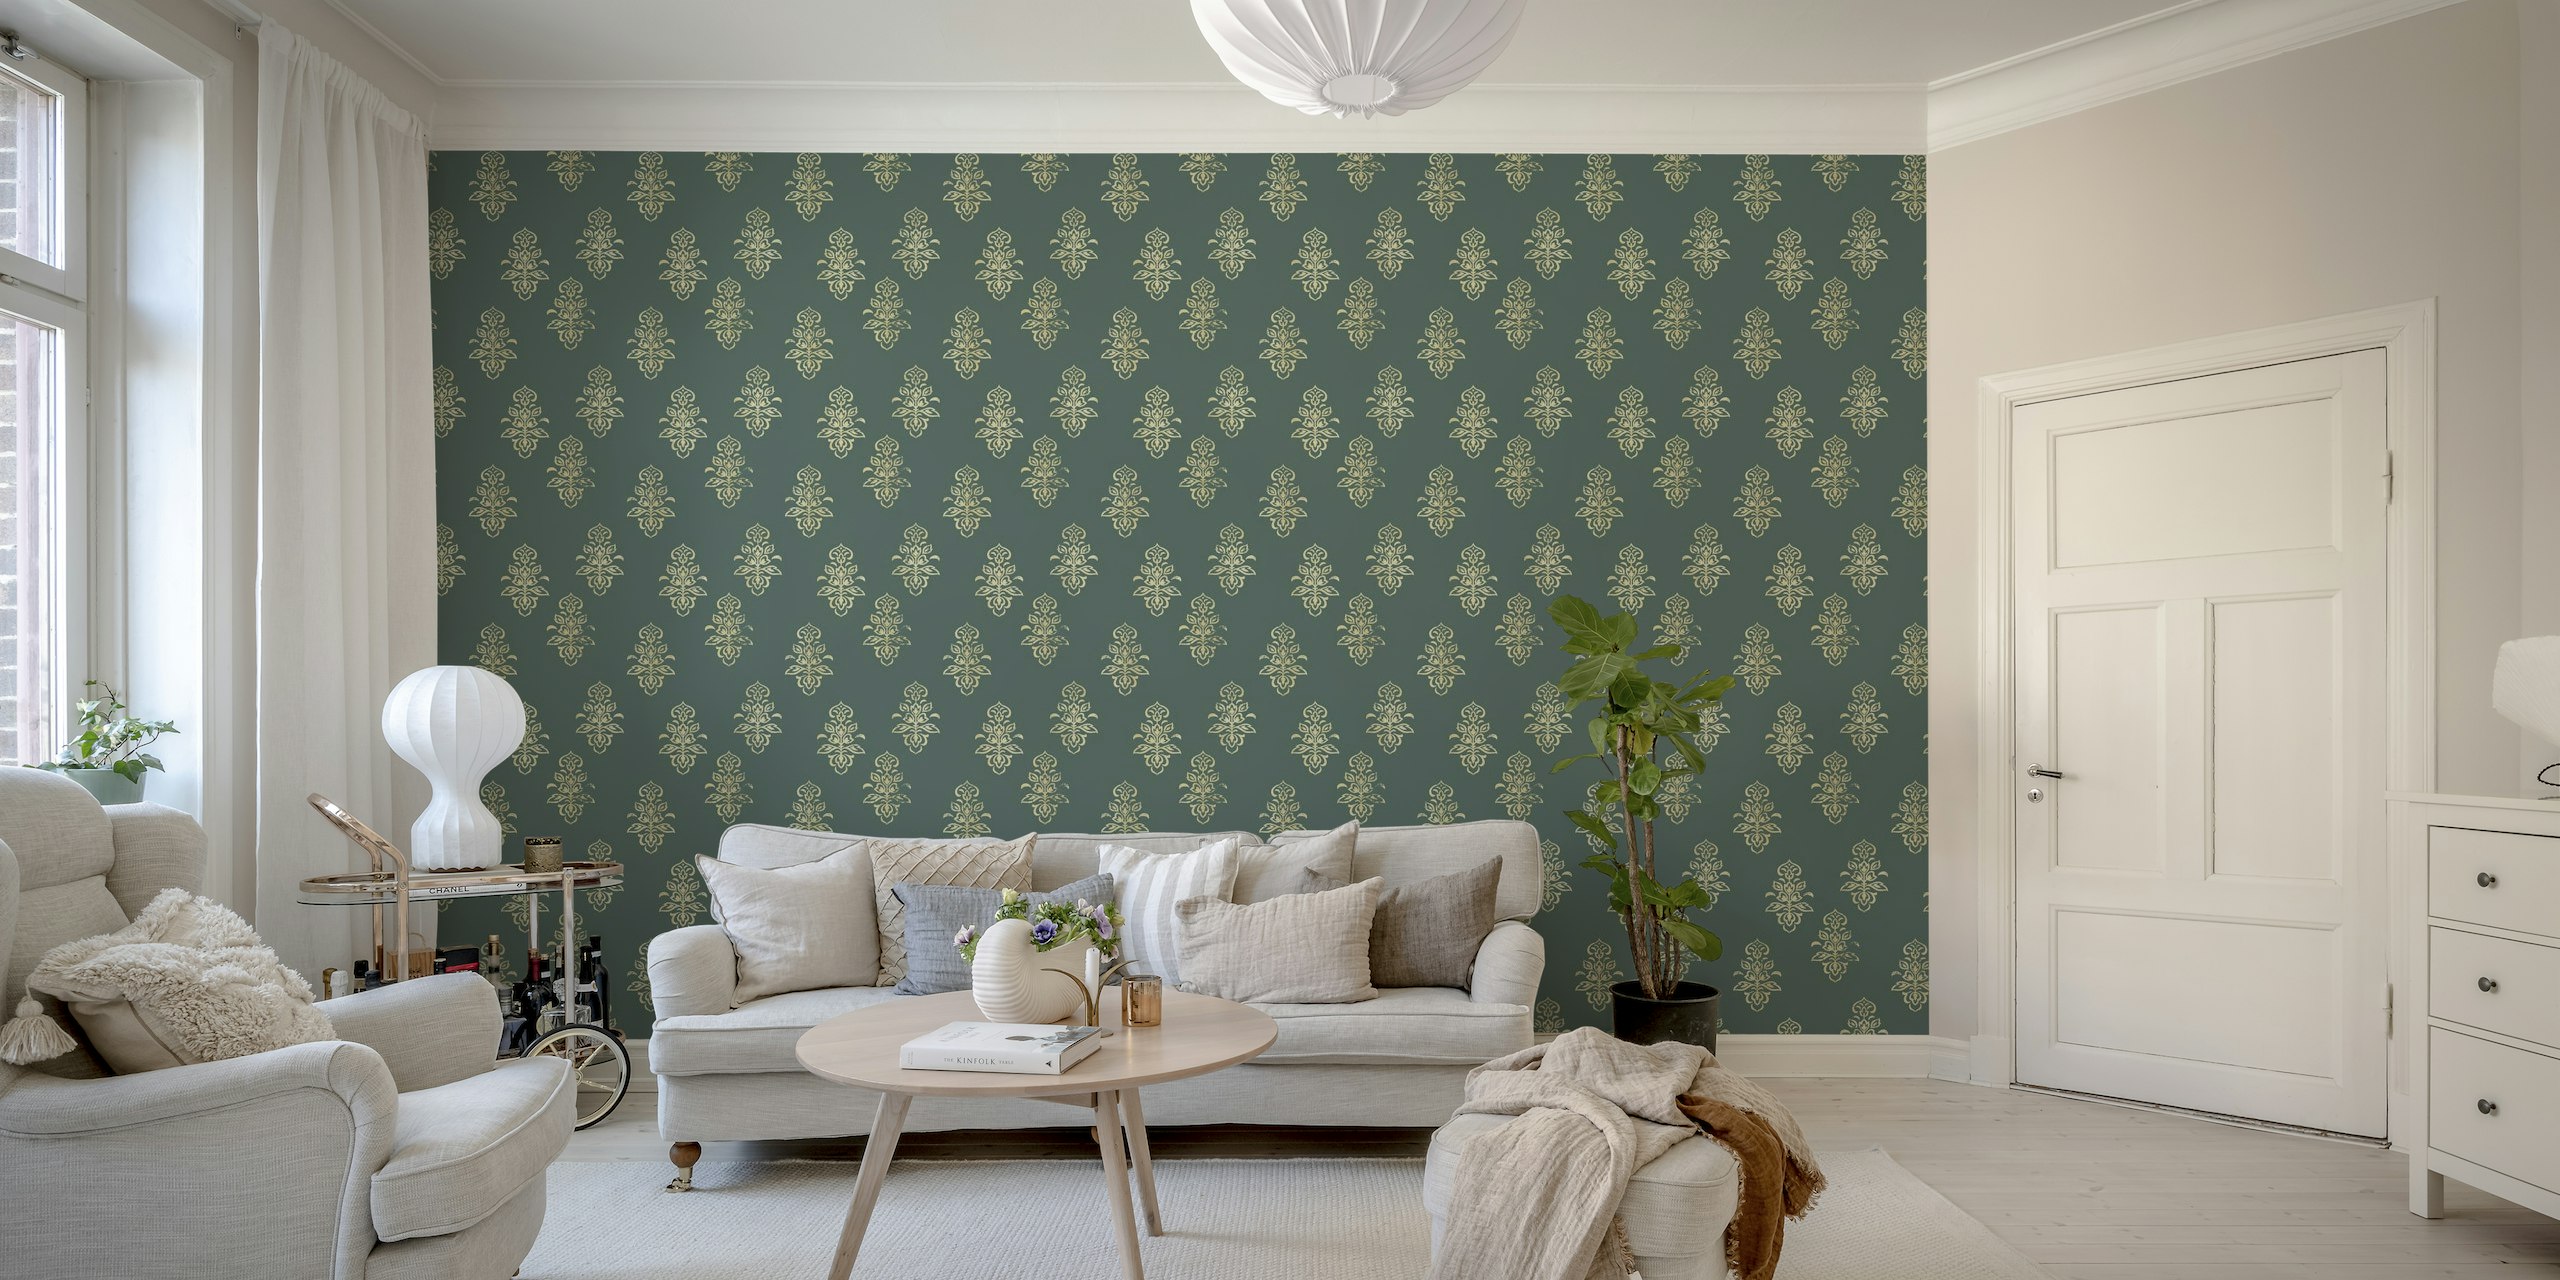 Elegant bohemian pattern wall mural with gold accents on a deep green background